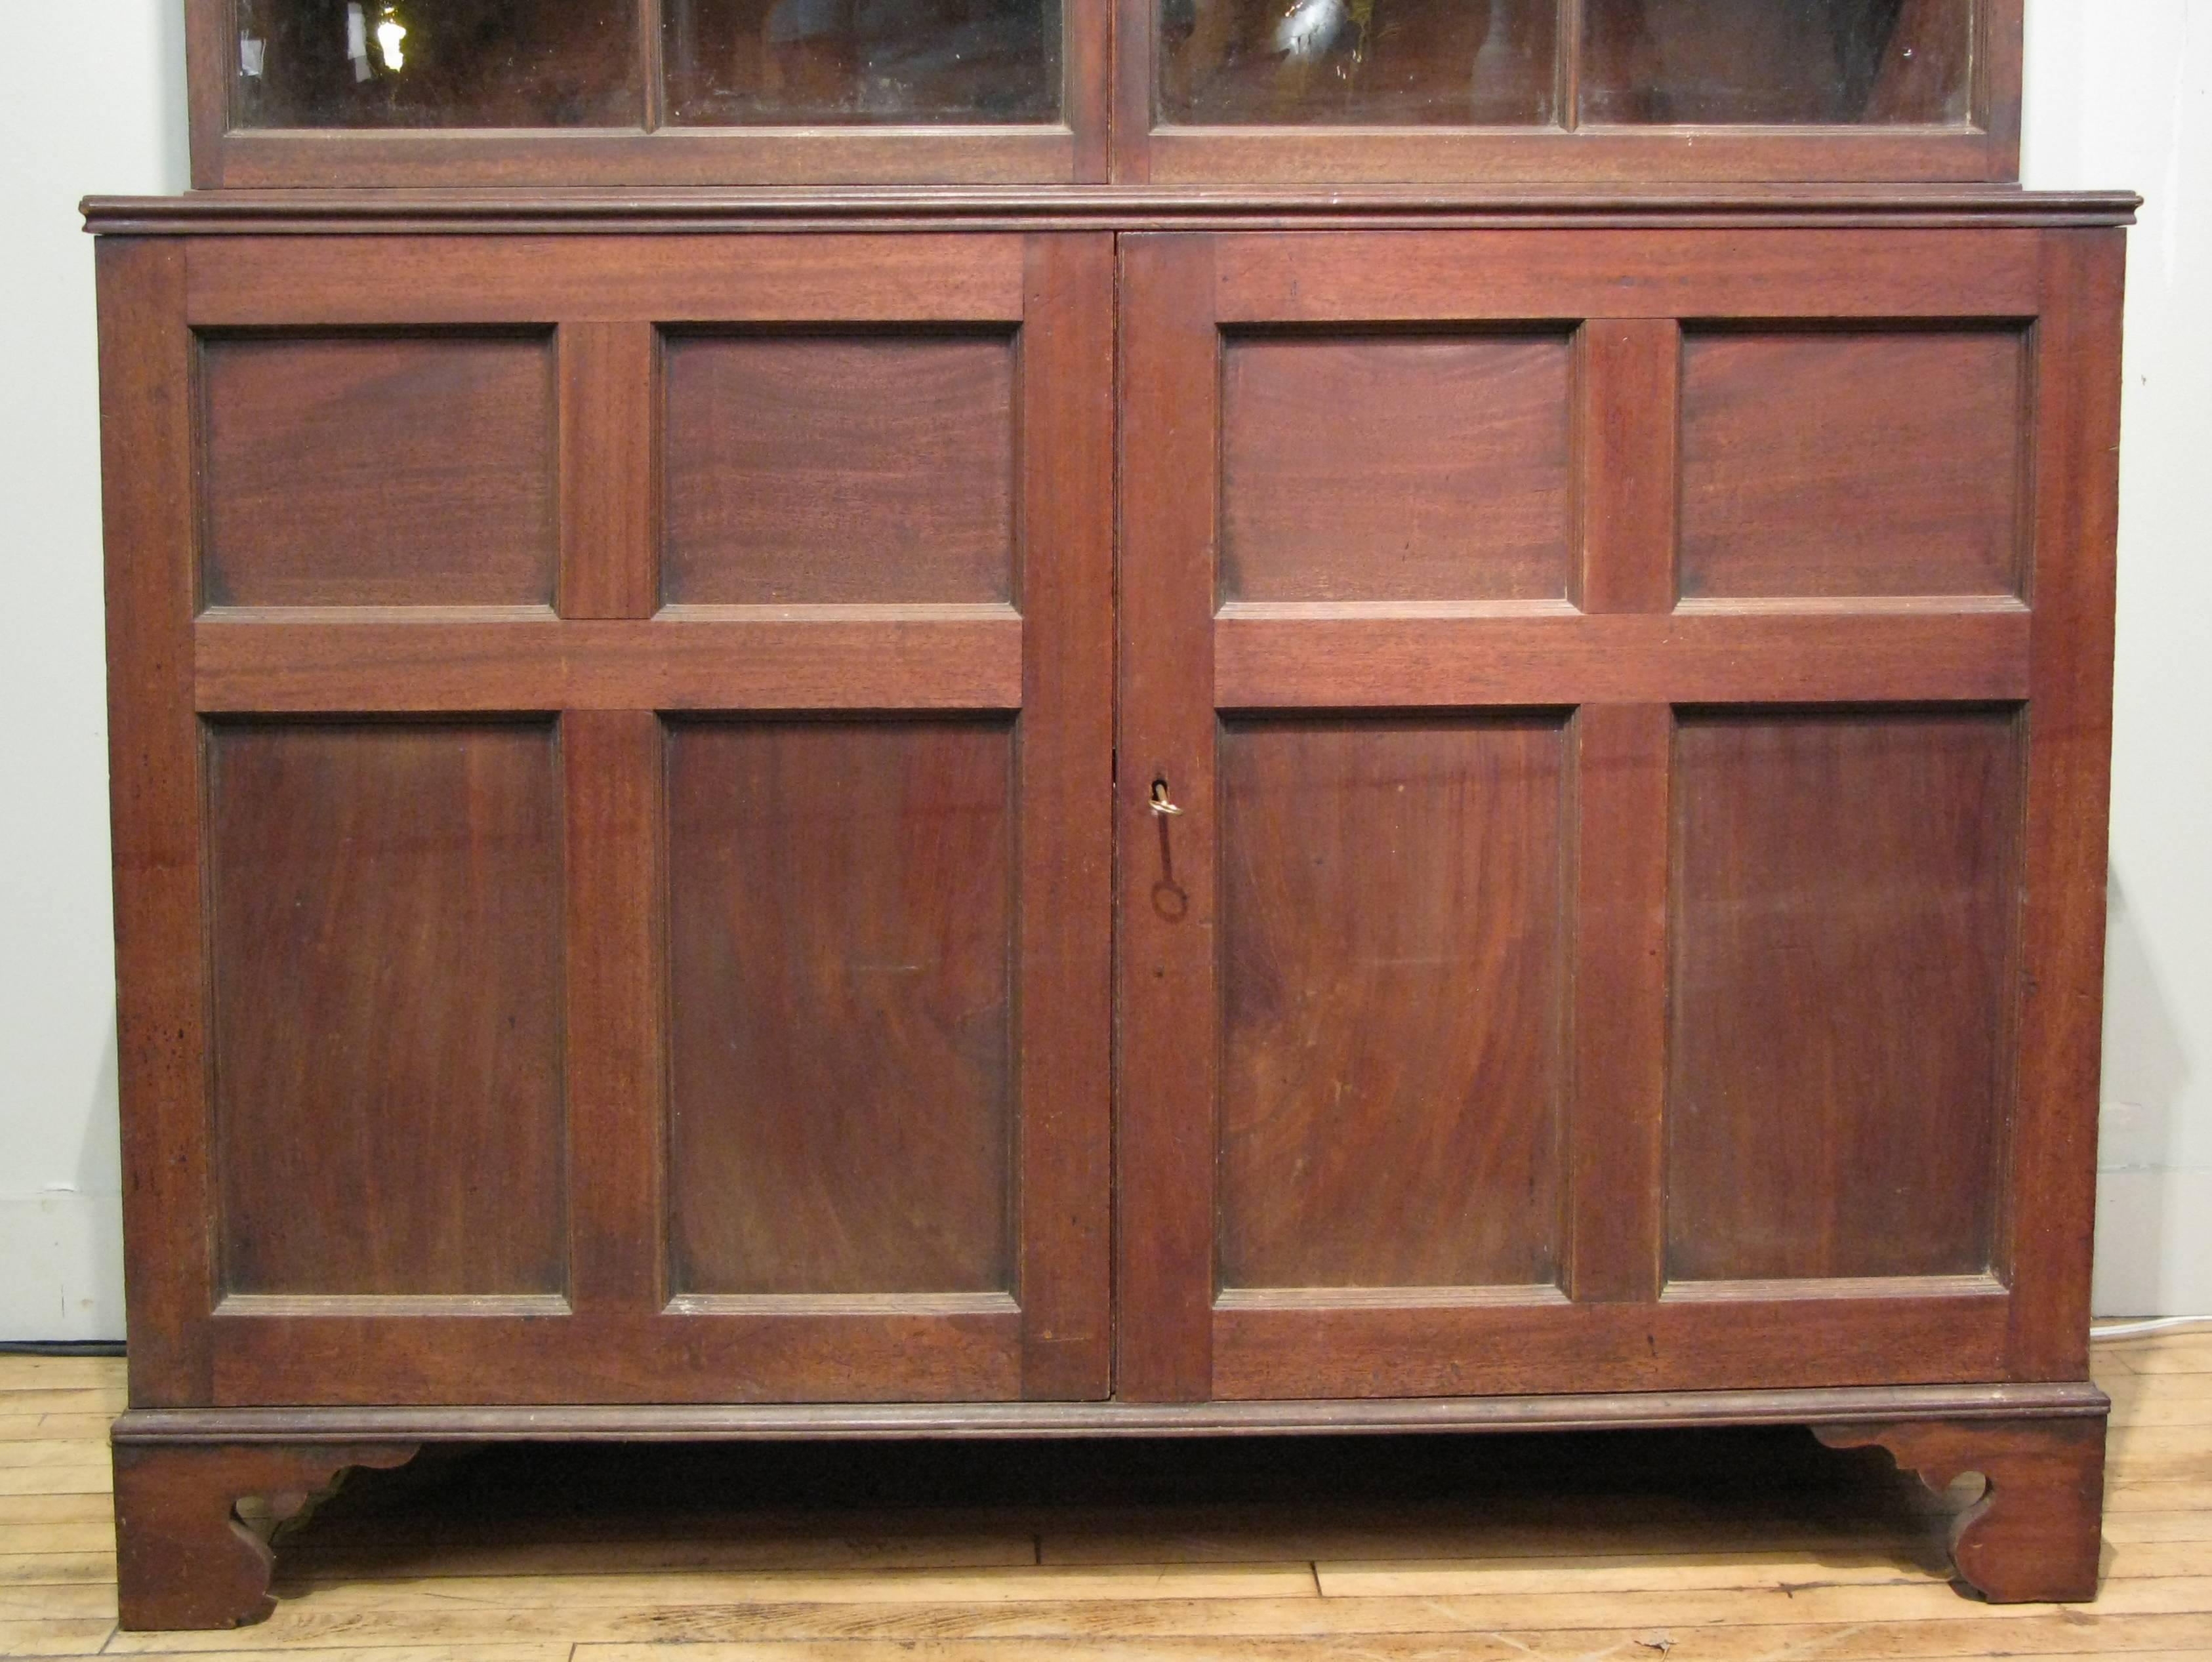 A very handsome antique late 18th century mahogany cabinet, with a base with hinged doors and a divided interior. The upper portion has a pair of hinged doors with original glass and very slim mullions and a divided interior. This is a very